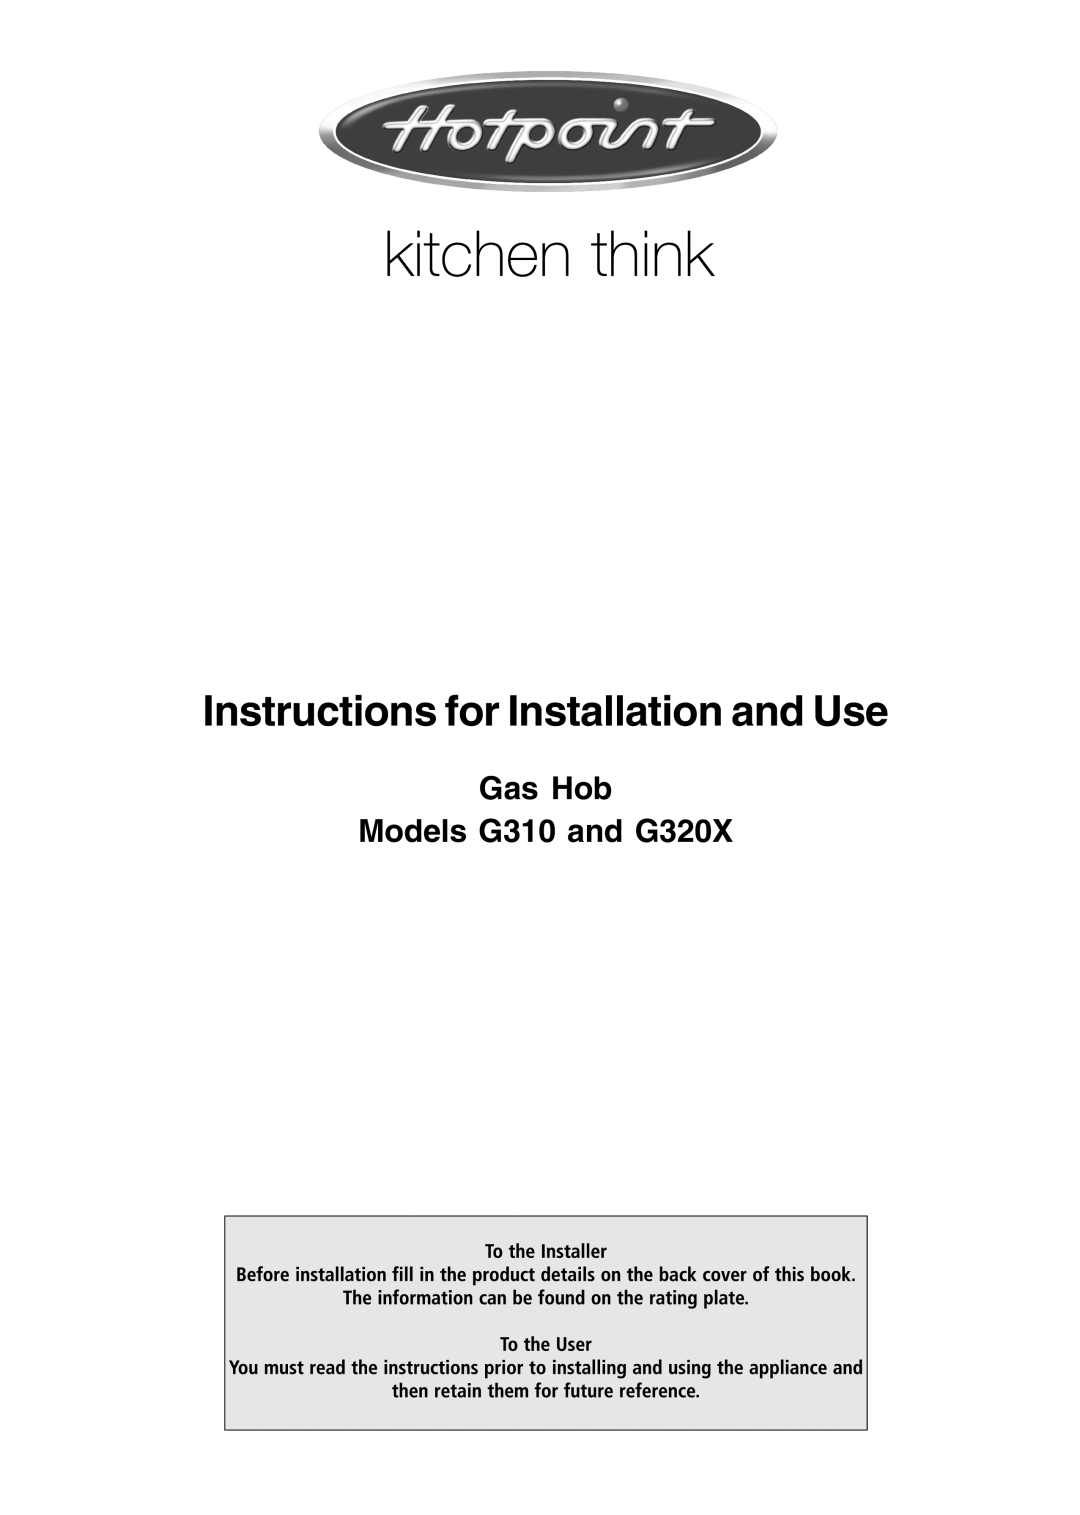 Hotpoint manual Gas Hob Models G310 and G320X, Instructions for Installation and Use 